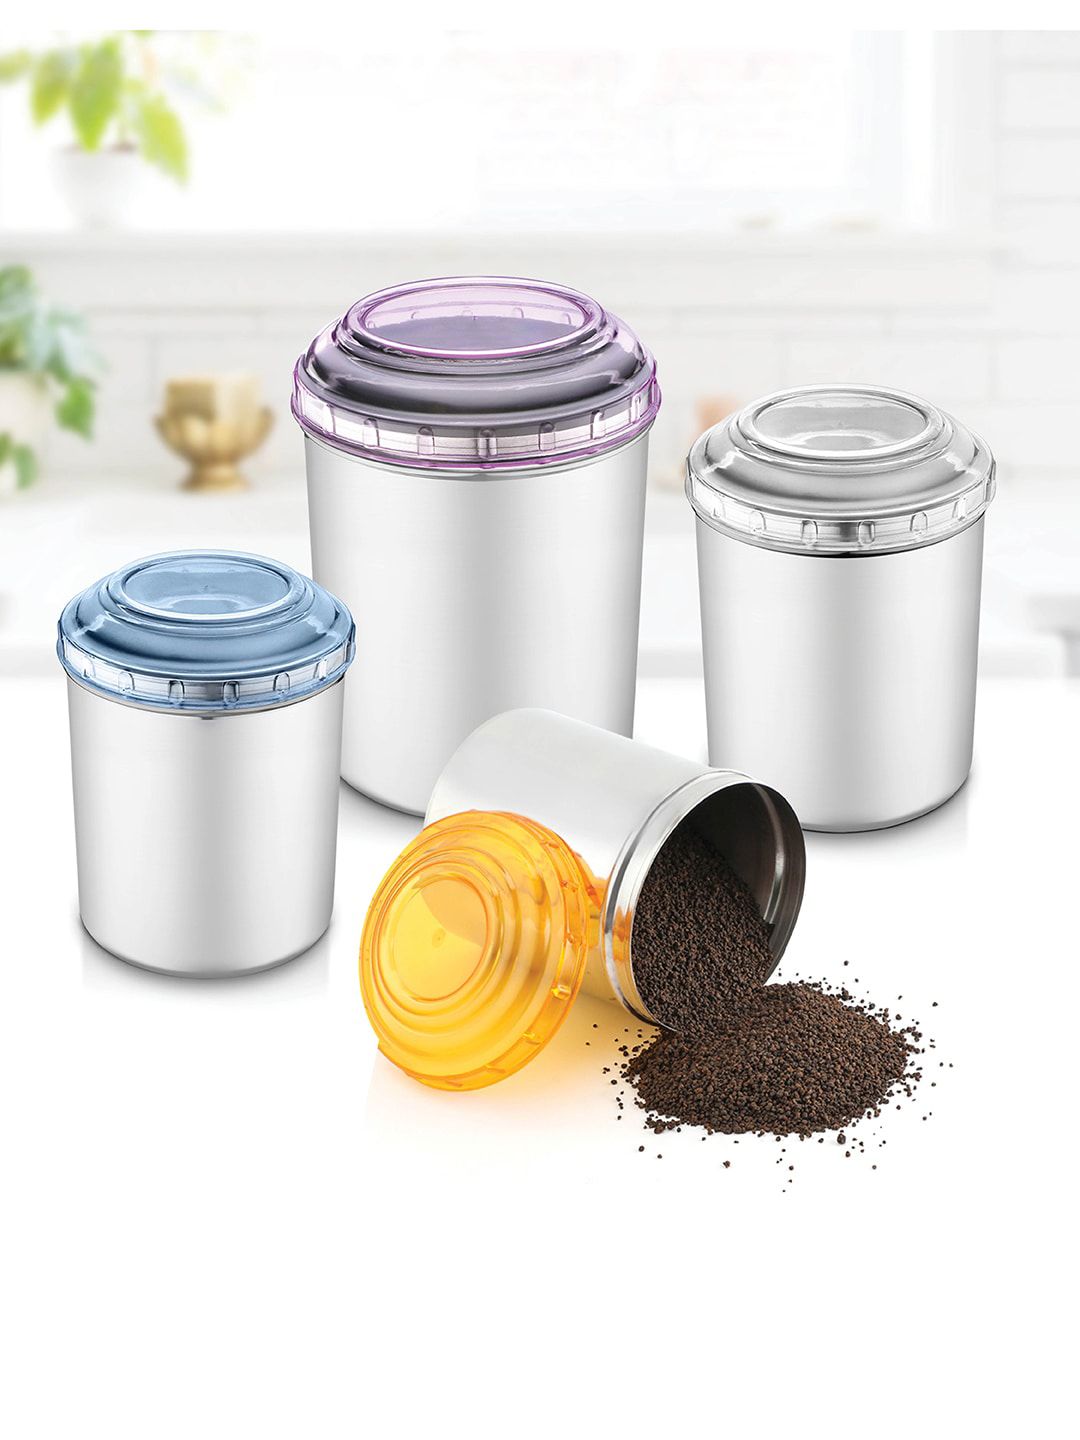 Jensons Set Of 16 Silver-Toned Solid Stainless Steel Canisters Price in India